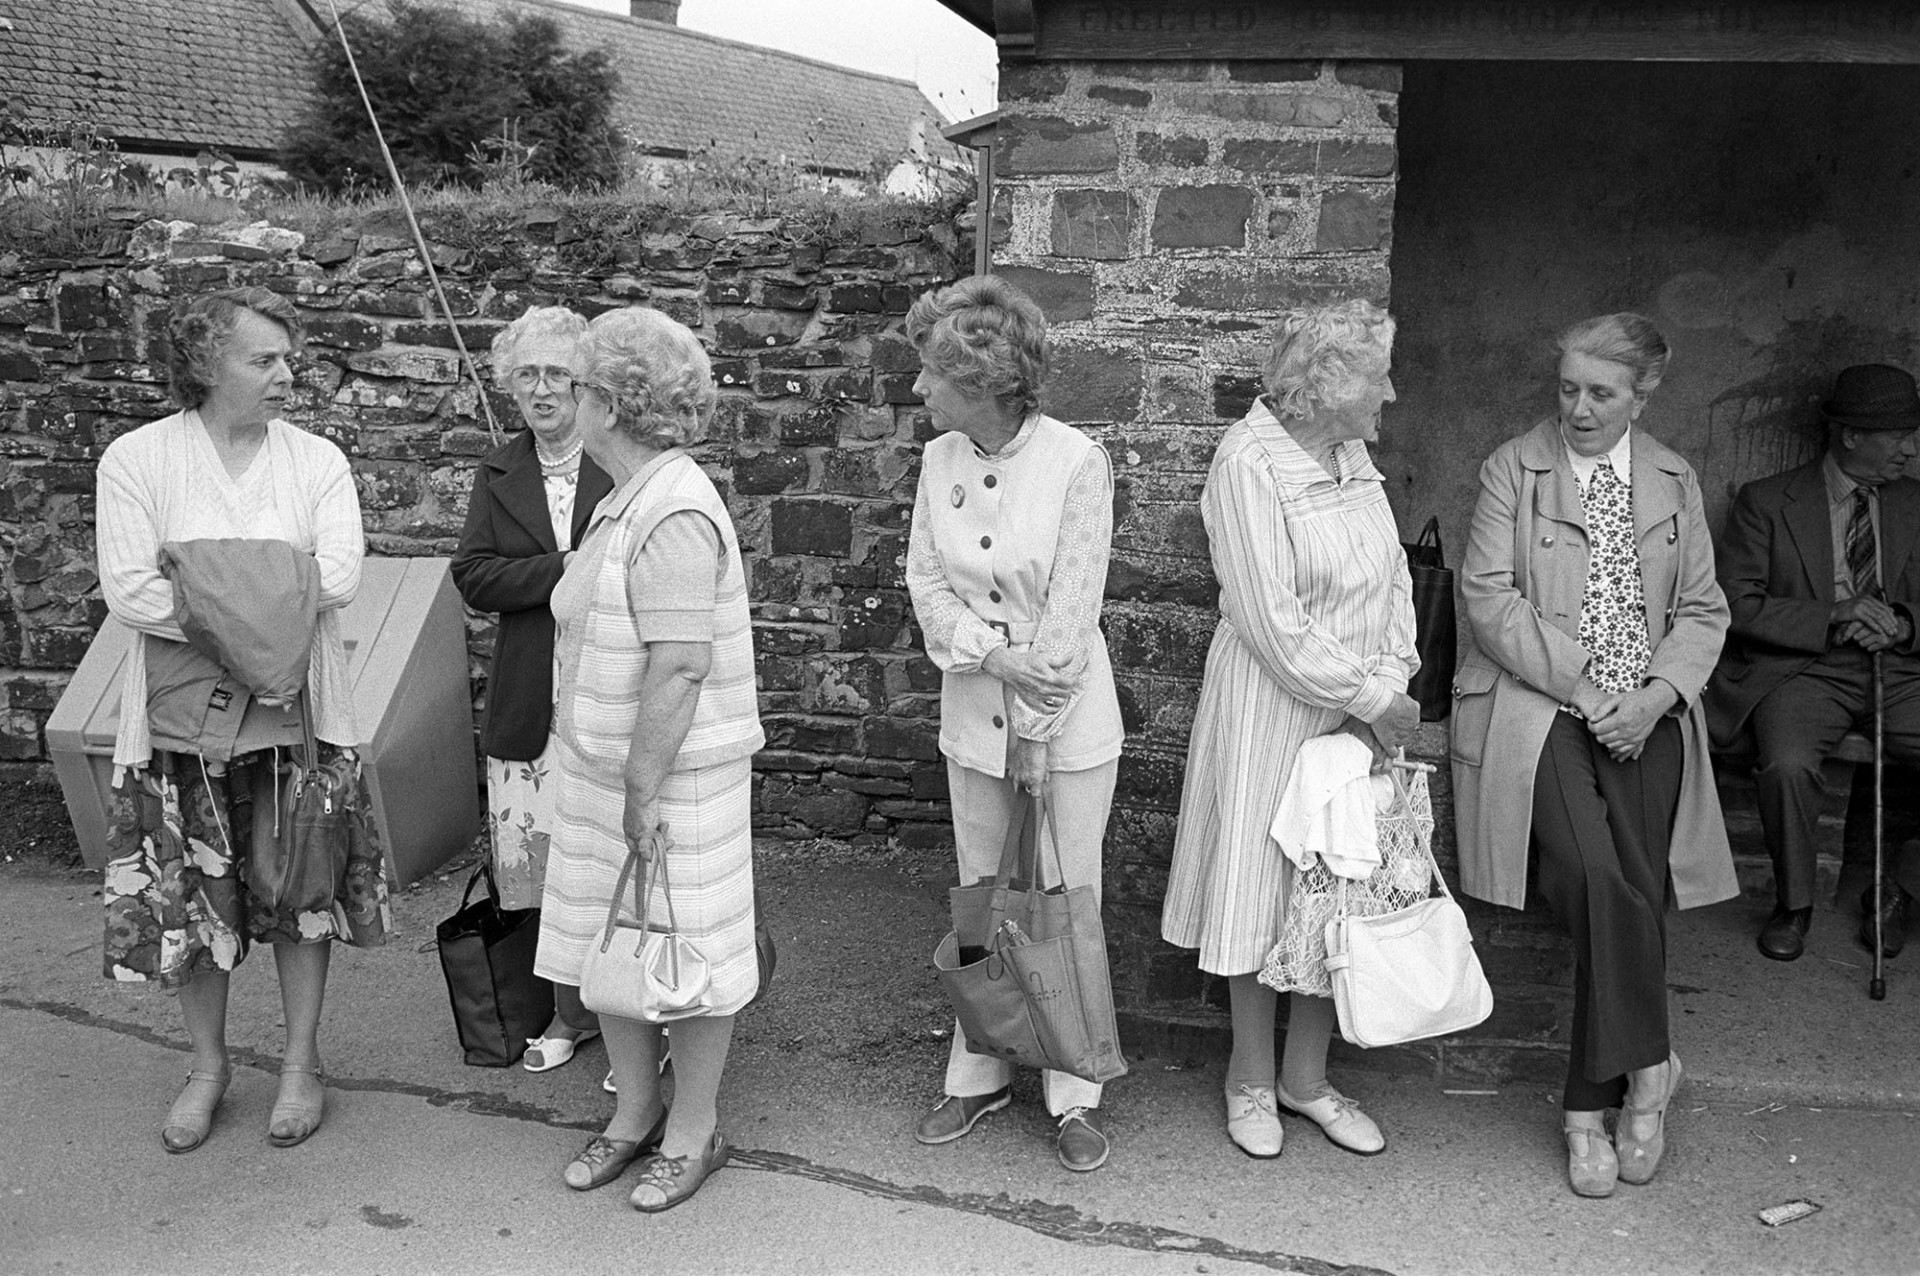 Women waiting for bus on Friday market day, dresses for summer. 
[Women including Mrs Down, Mrs Heard, Mrs Pickard and Mrs Ayre waiting at a bus shelter in Dolton for the Friday bus to go to a market. Some of the women are wearing summer dresses.]